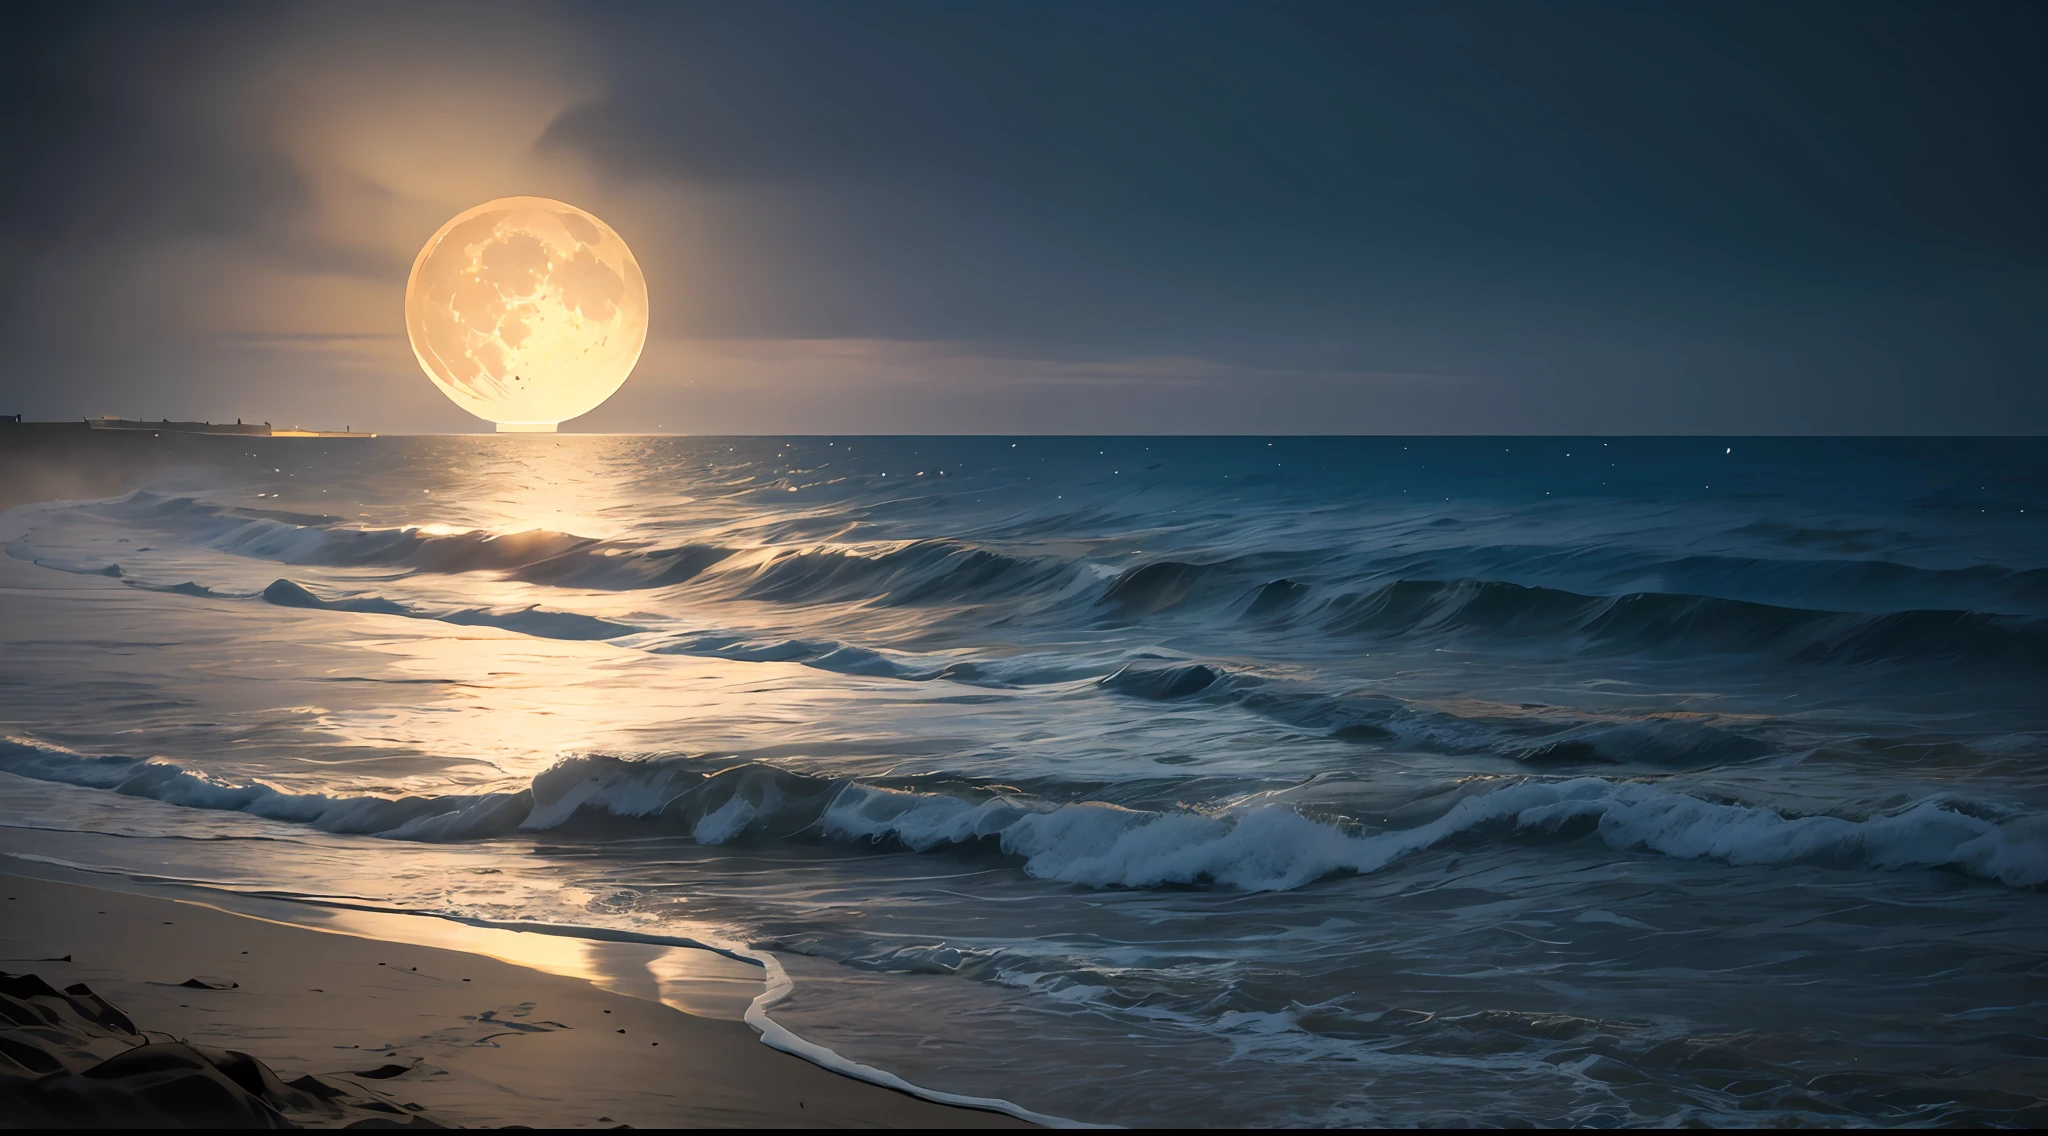 (moonlit night),(on the beach,crashing waves),(dramatic lighting),(silhouettes),(sparkling sand),(peaceful and relaxing atmosphere), 100s of paper lanternsin sky, lots of paper beautiful lanterns in sky, beautiful huge moon